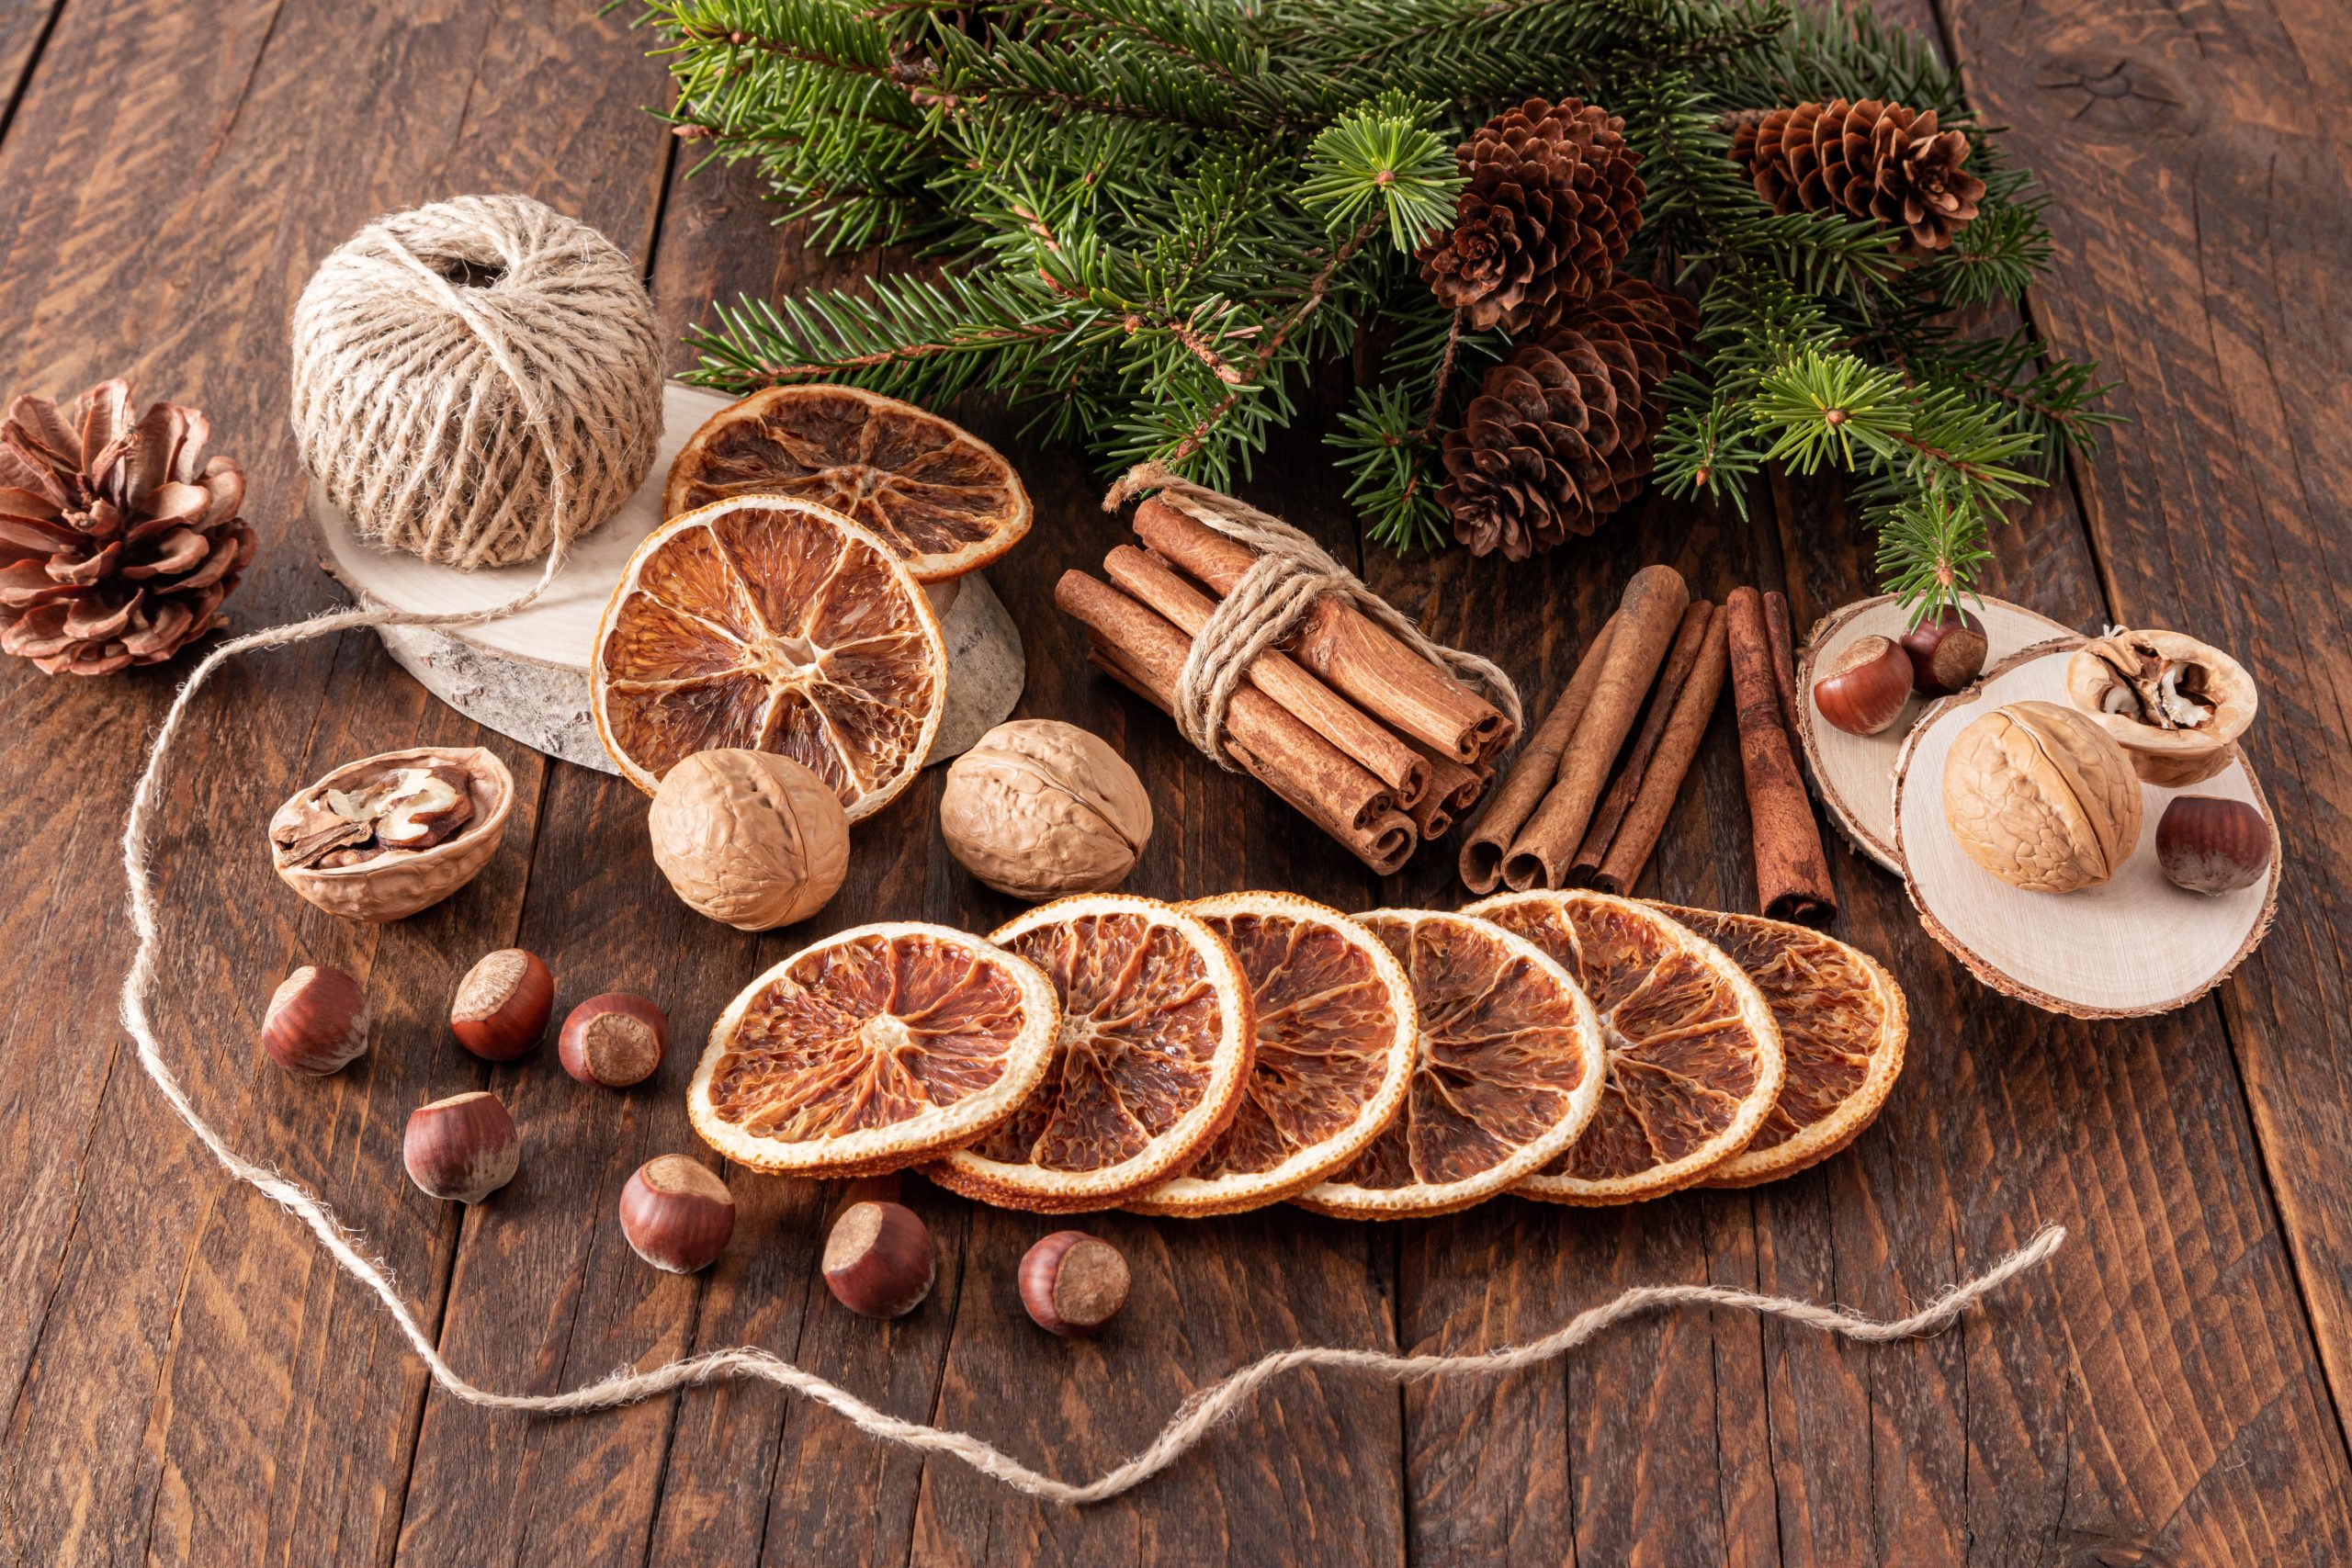 Christmas handmade natural decorations. Garland made of dried slices of oranges on wooden table. Winter still life composition